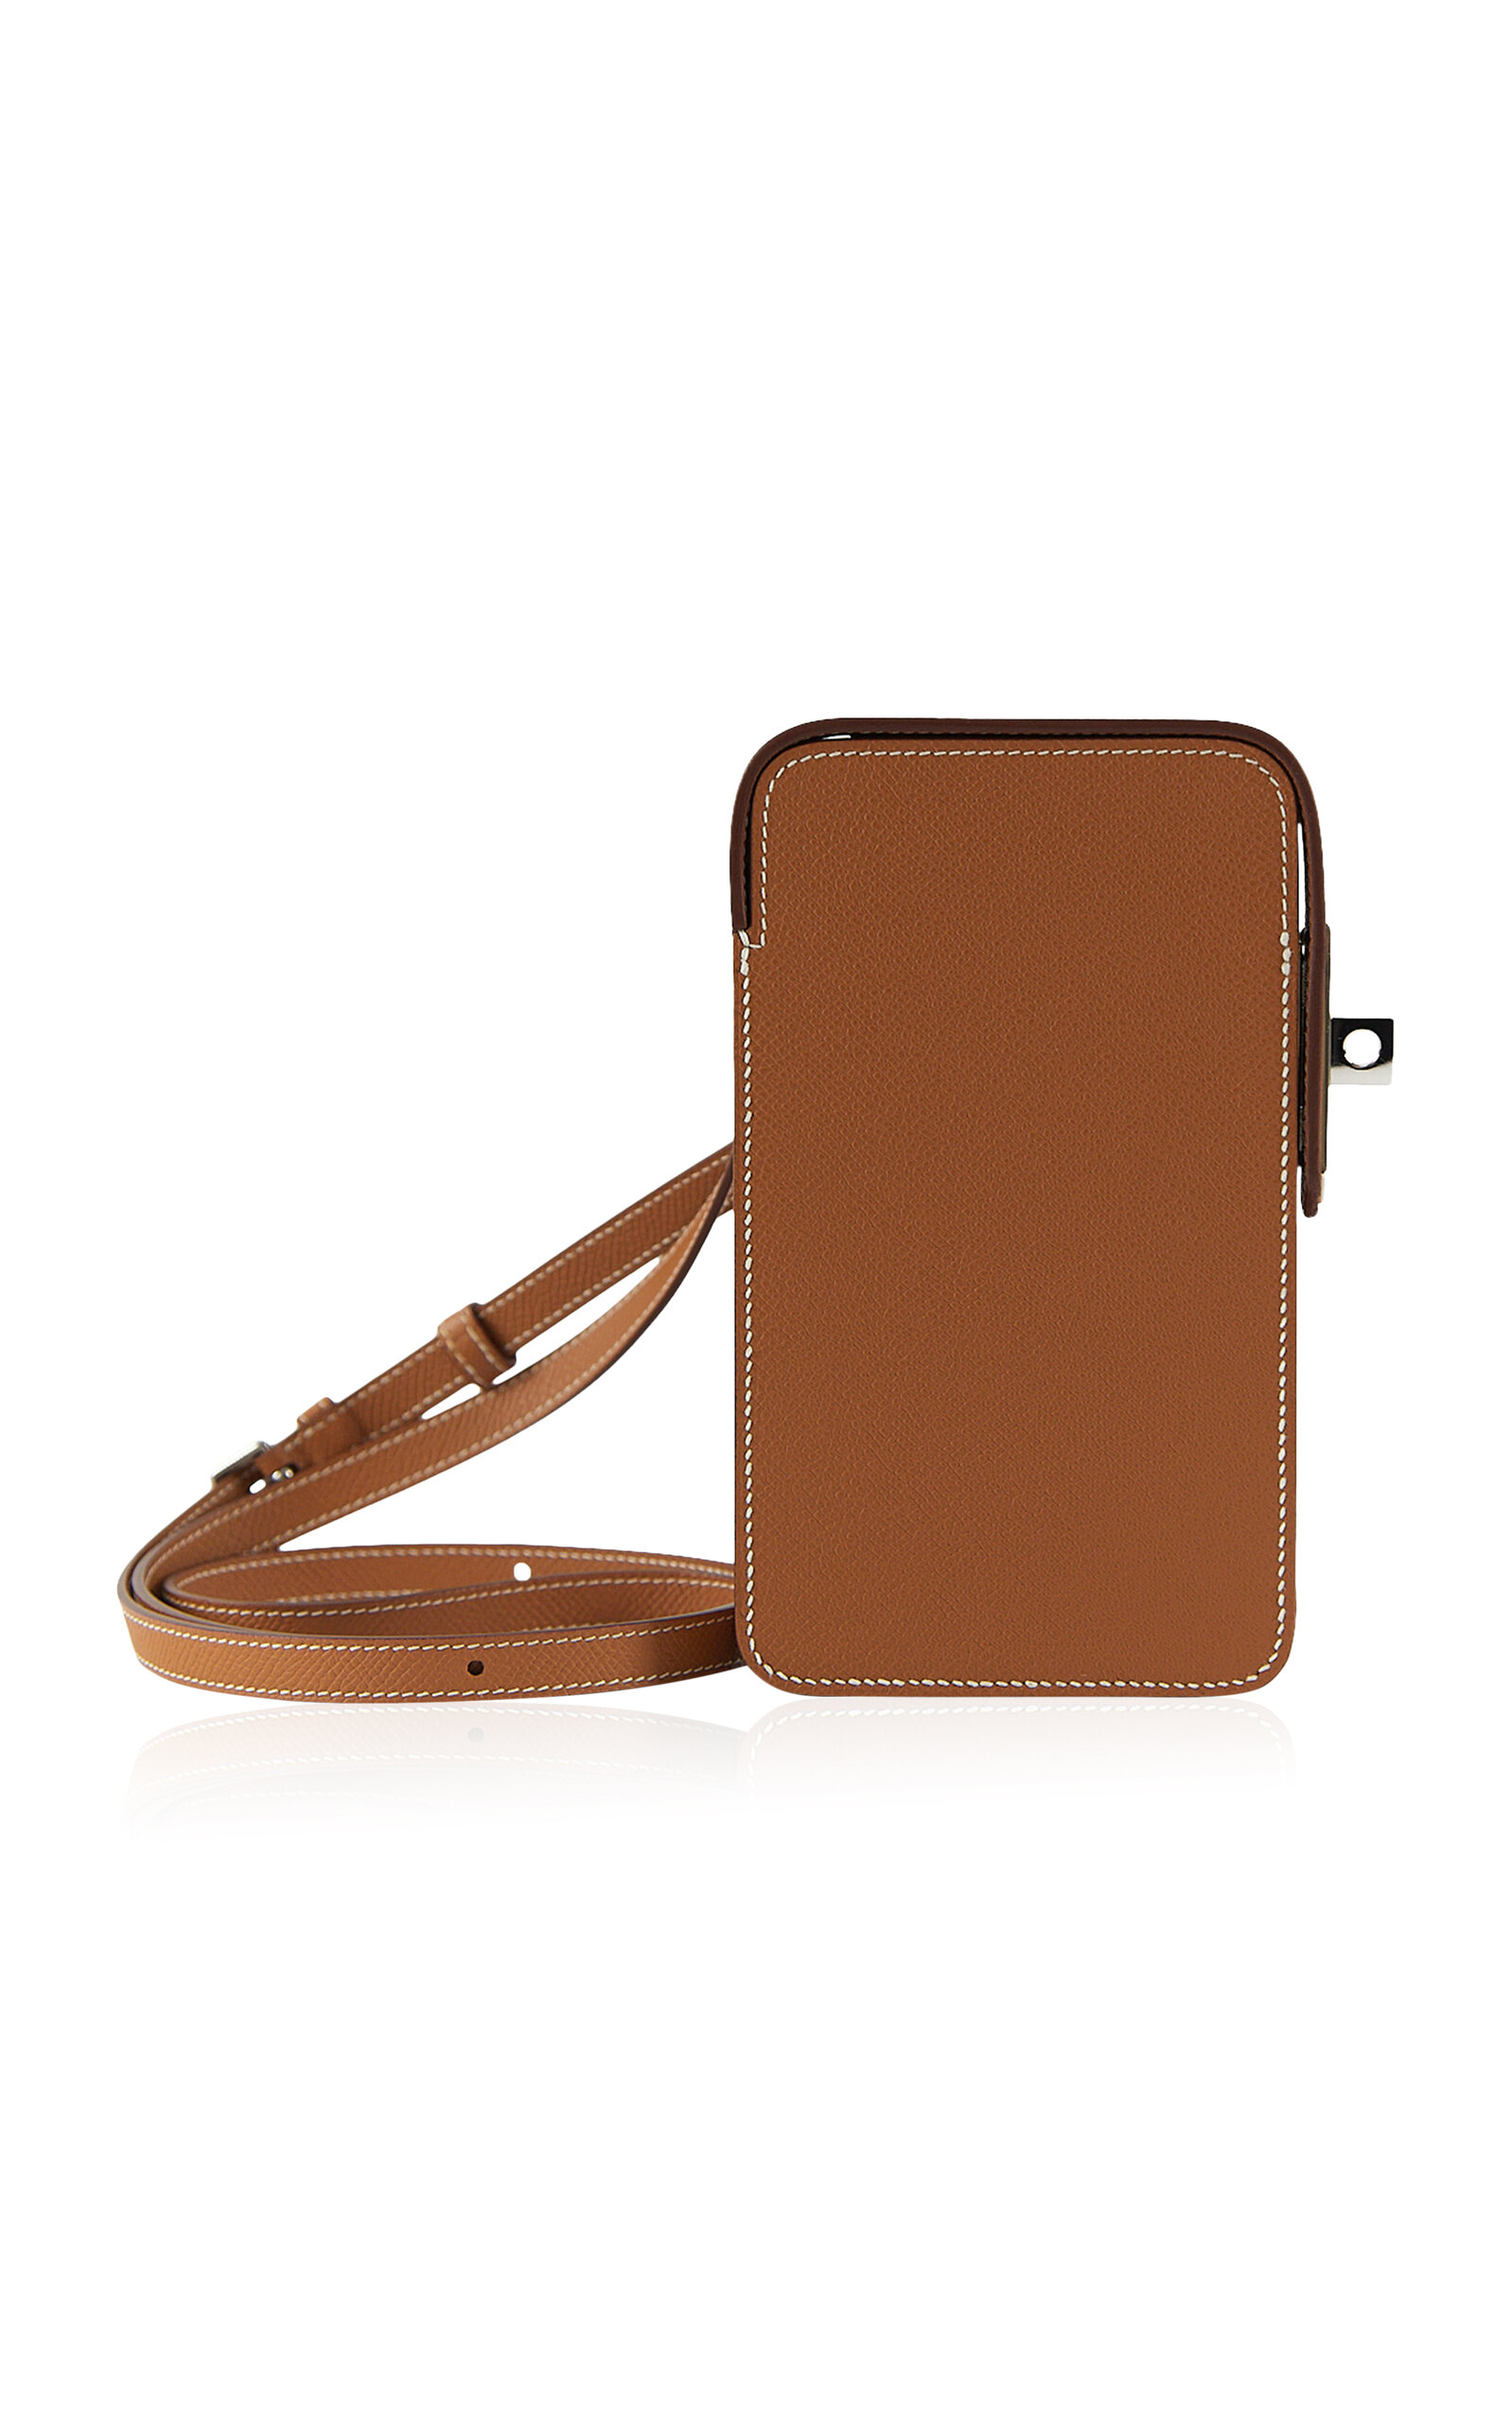 Hermès - Pristine SS23 Hac a Box Phone Case in Epsom Leather - Gold - OS - Only At Moda Operandi